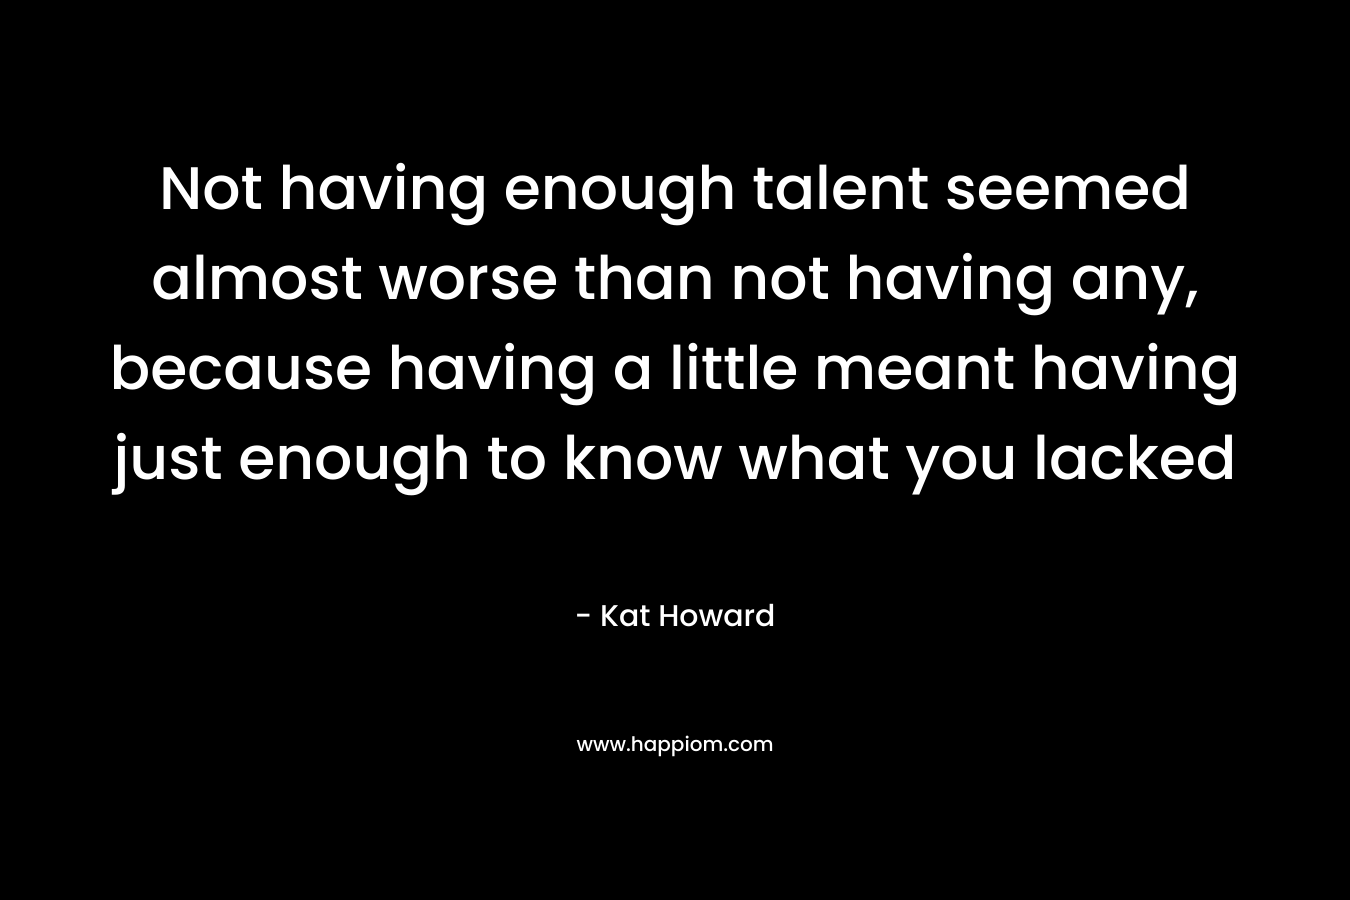 Not having enough talent seemed almost worse than not having any, because having a little meant having just enough to know what you lacked